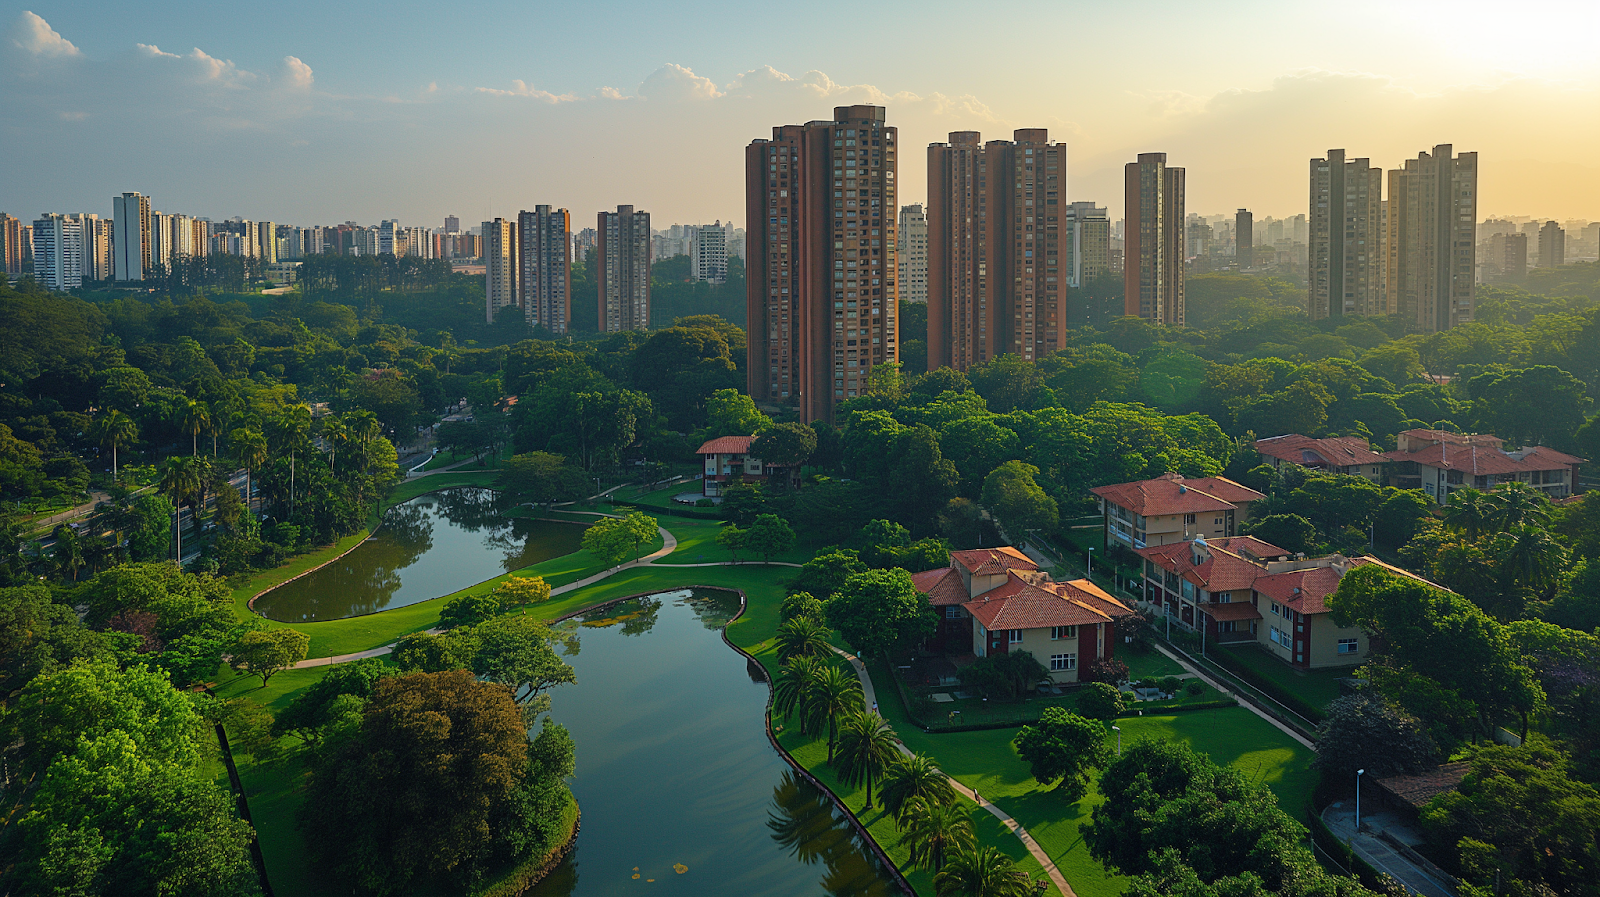 Aerial skyline of Itaim Bibi with skyscrapers and green areas in São Paulo